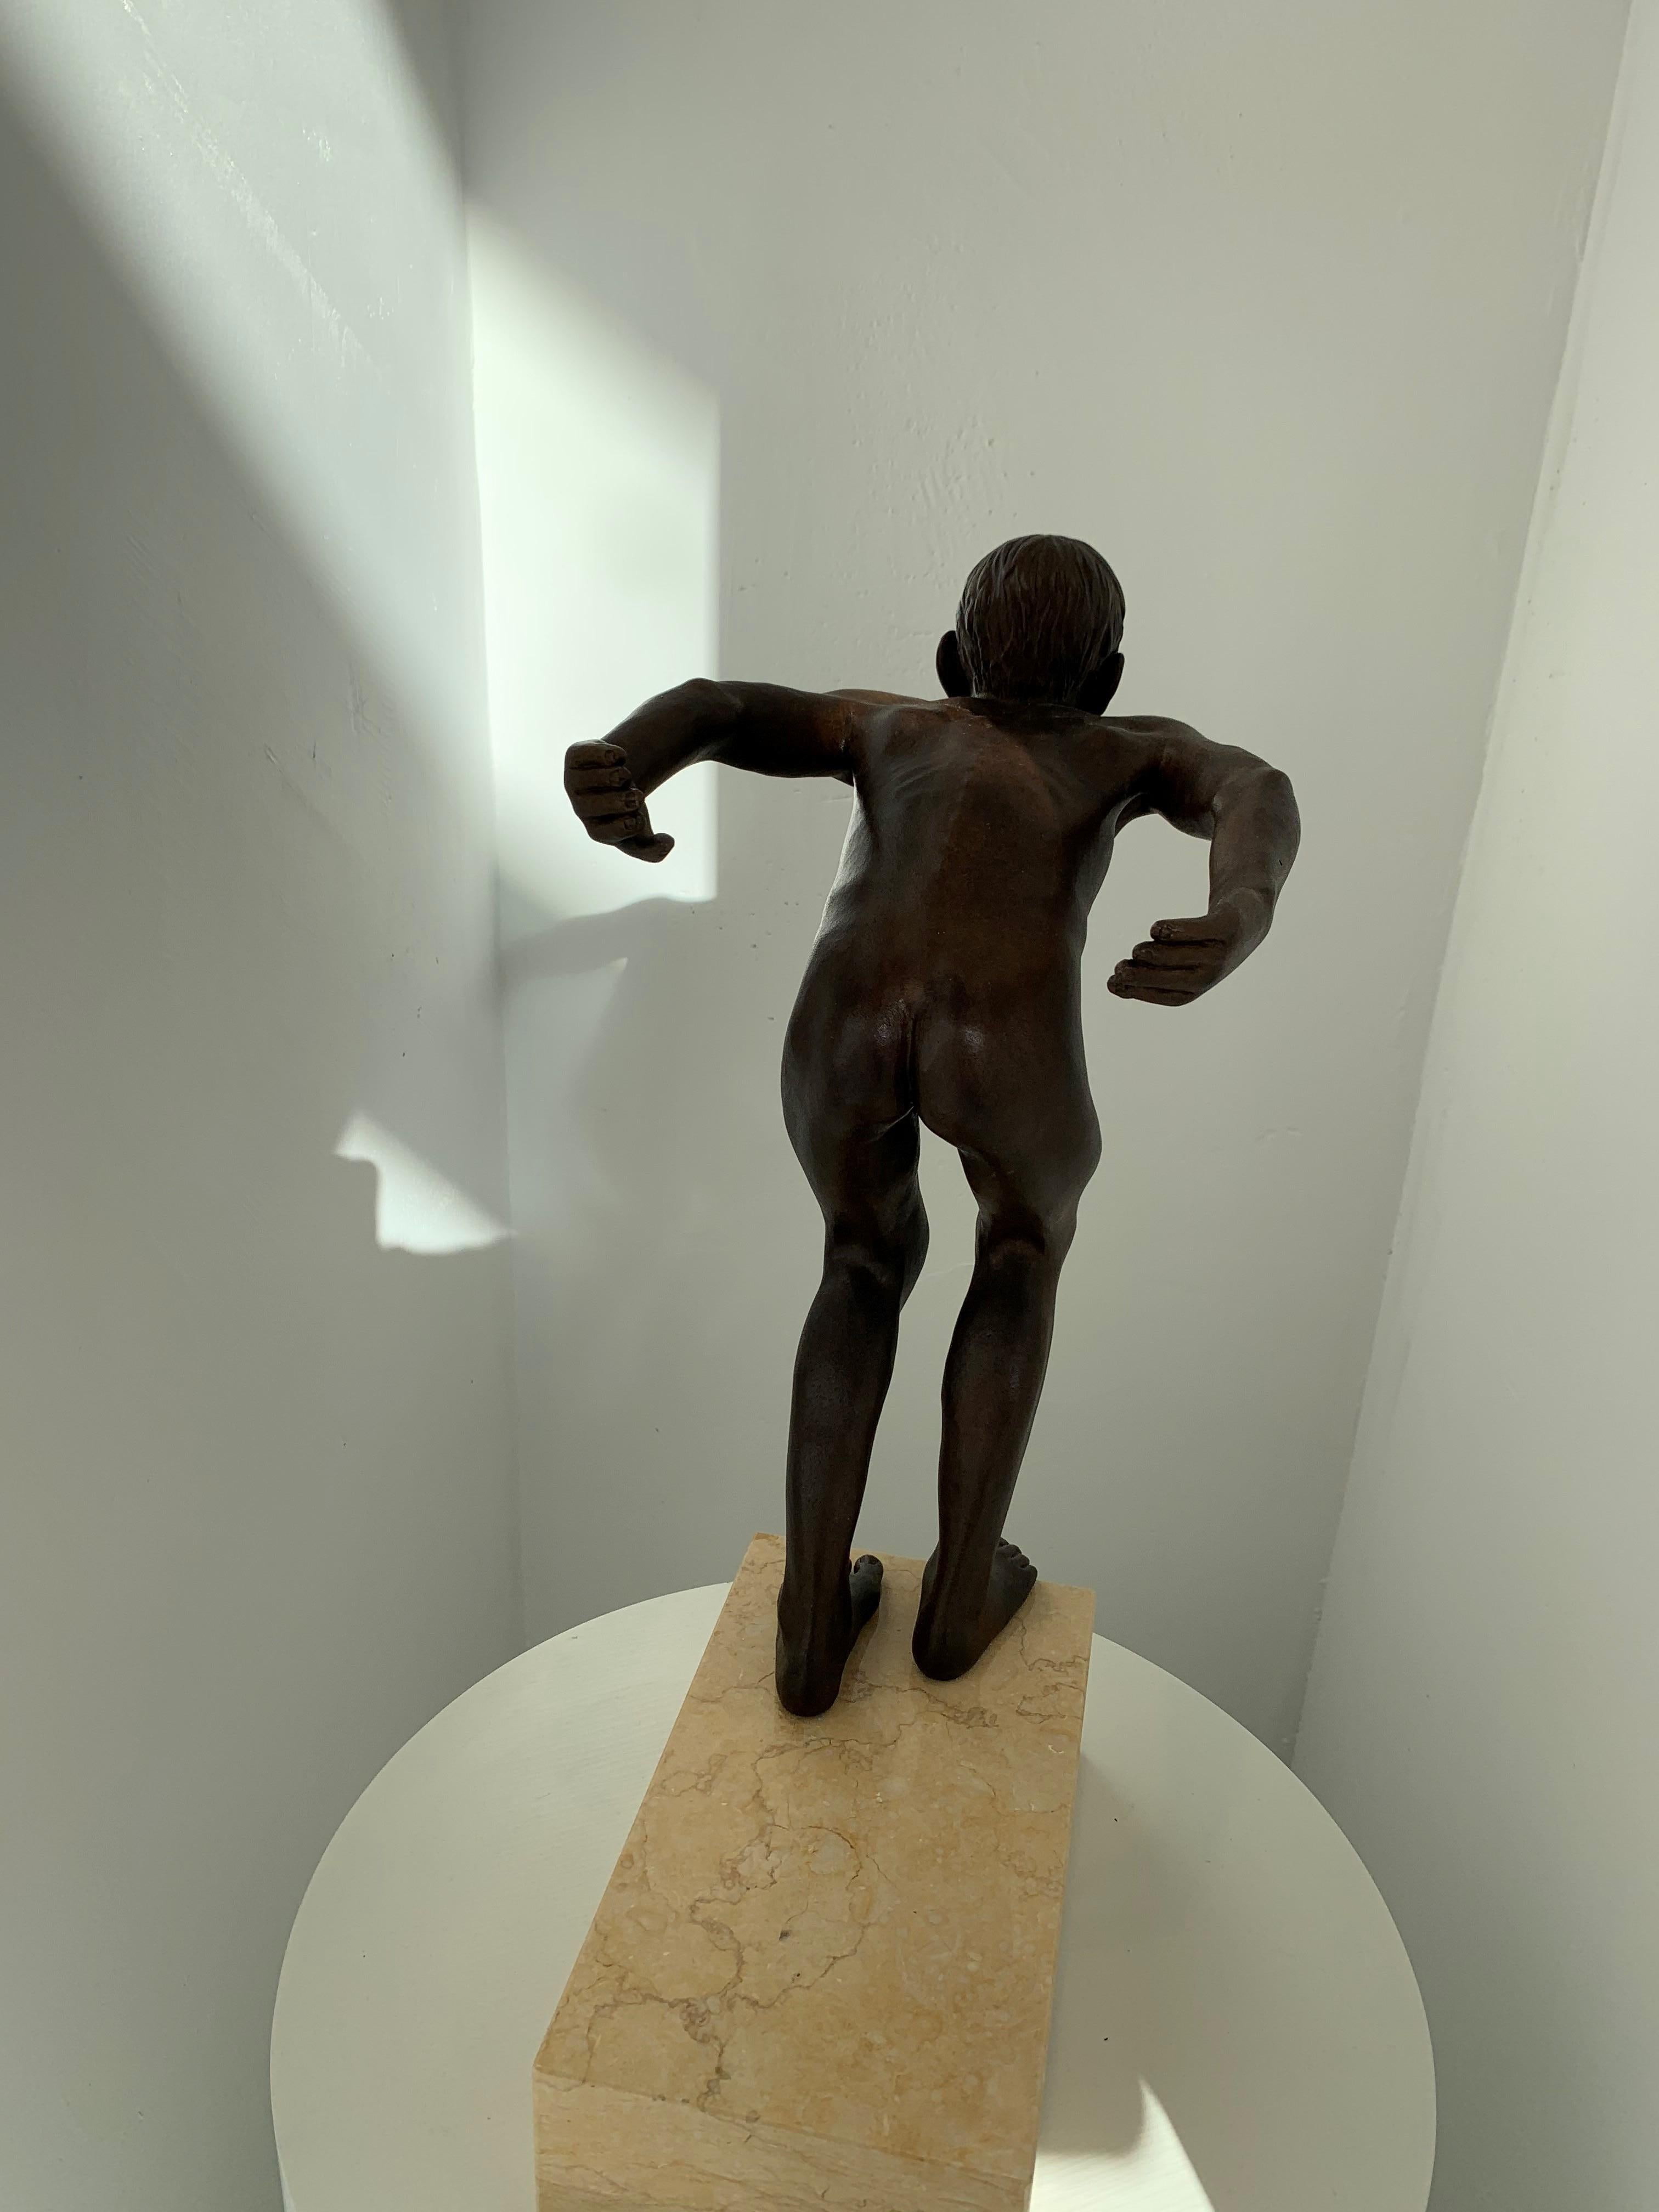 Insilit Bronze Marble Stone Nude Contemporary Sculpture Boy Jumping In Stock - Sizes of sculpture, without Stone pedestal : 40 x 32 x 22 cm 

Wim van der Kant (1949, Kampen) is a selftaught artist. Next to his busy profession as a teacher at a high